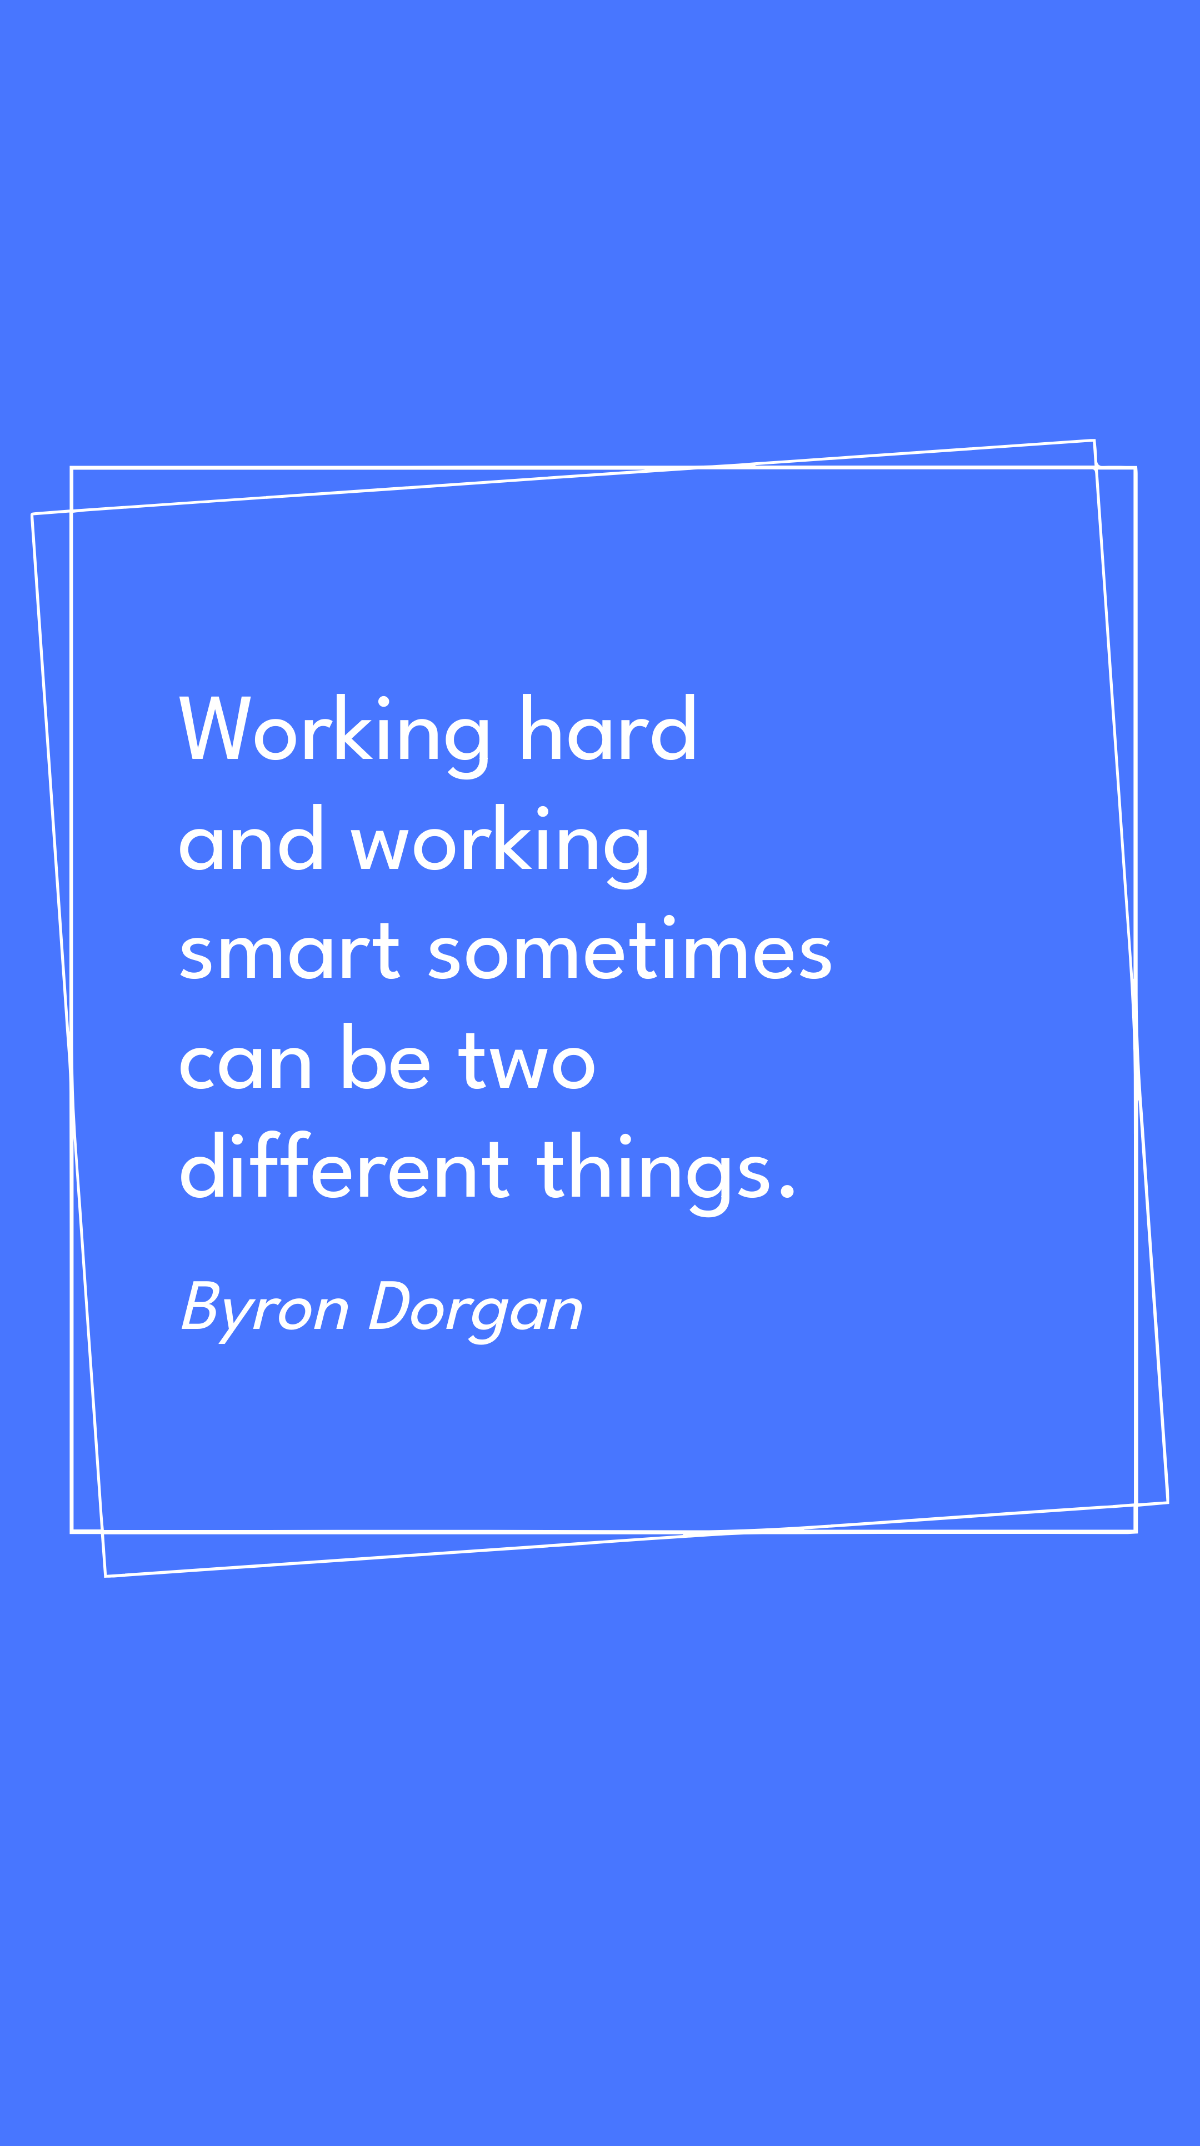 Byron Dorgan - Working hard and working smart sometimes can be two different things. Template